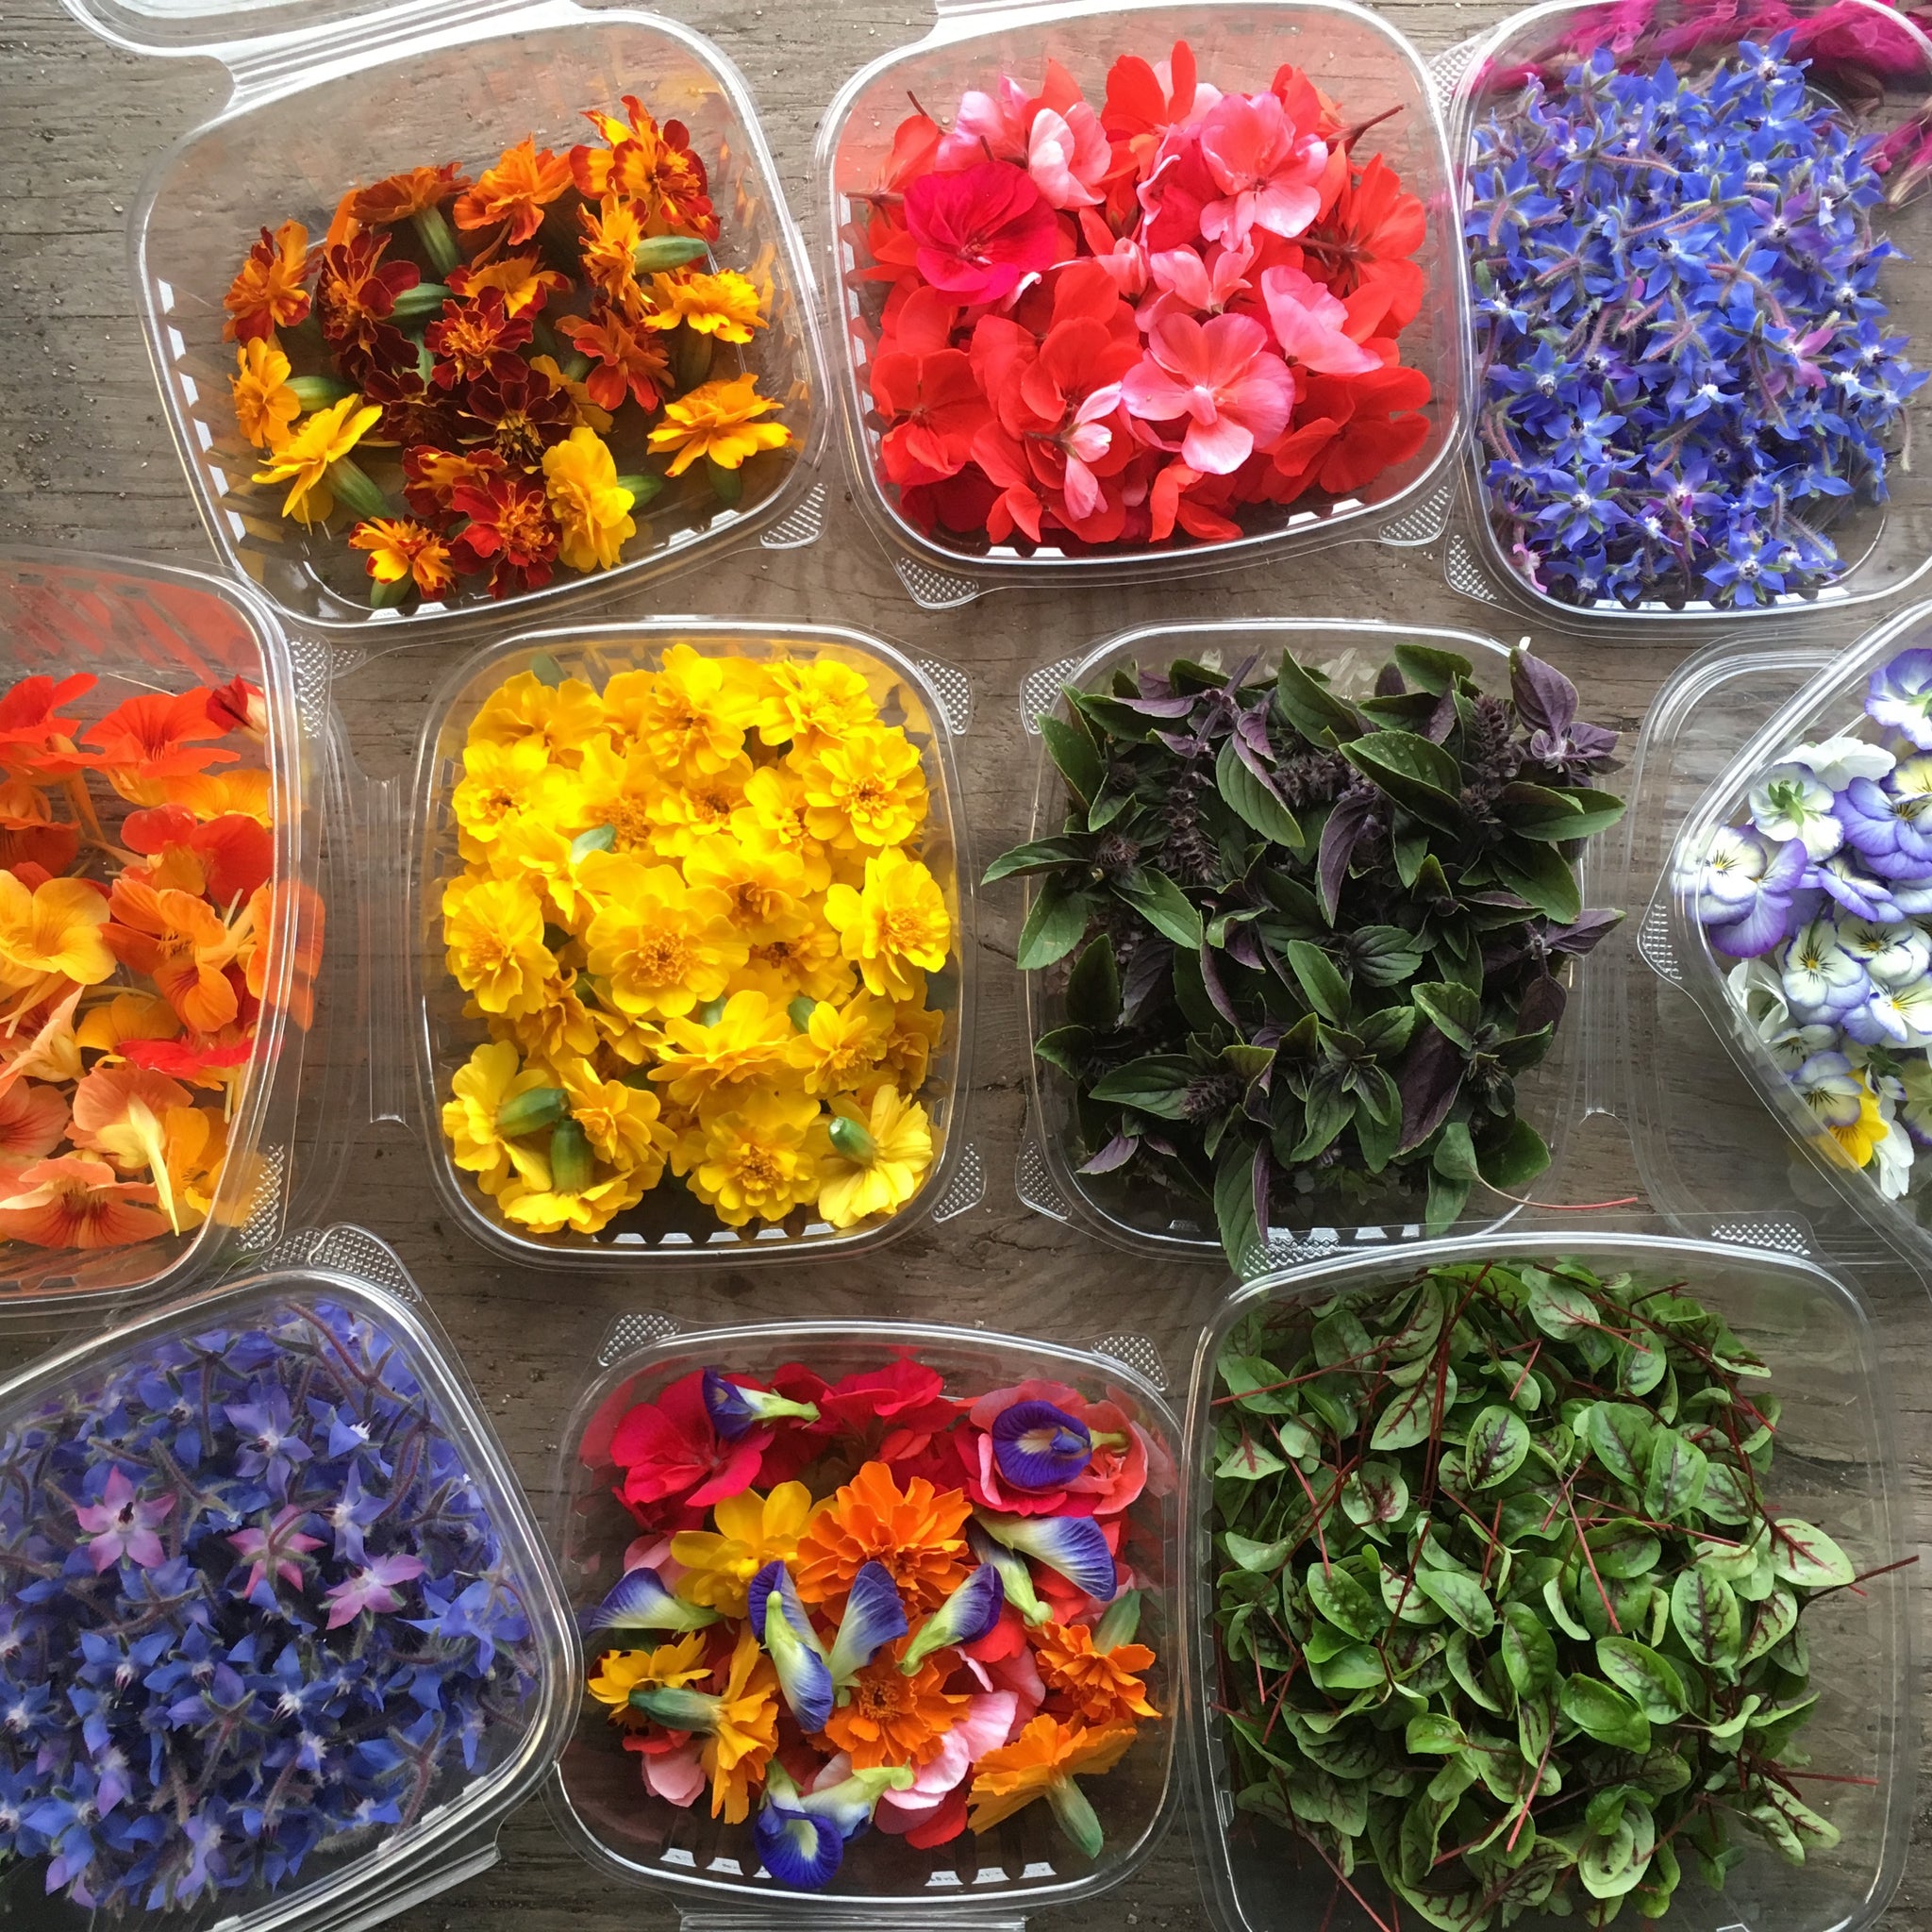 Terre Exotique Edible Flowers for Salad